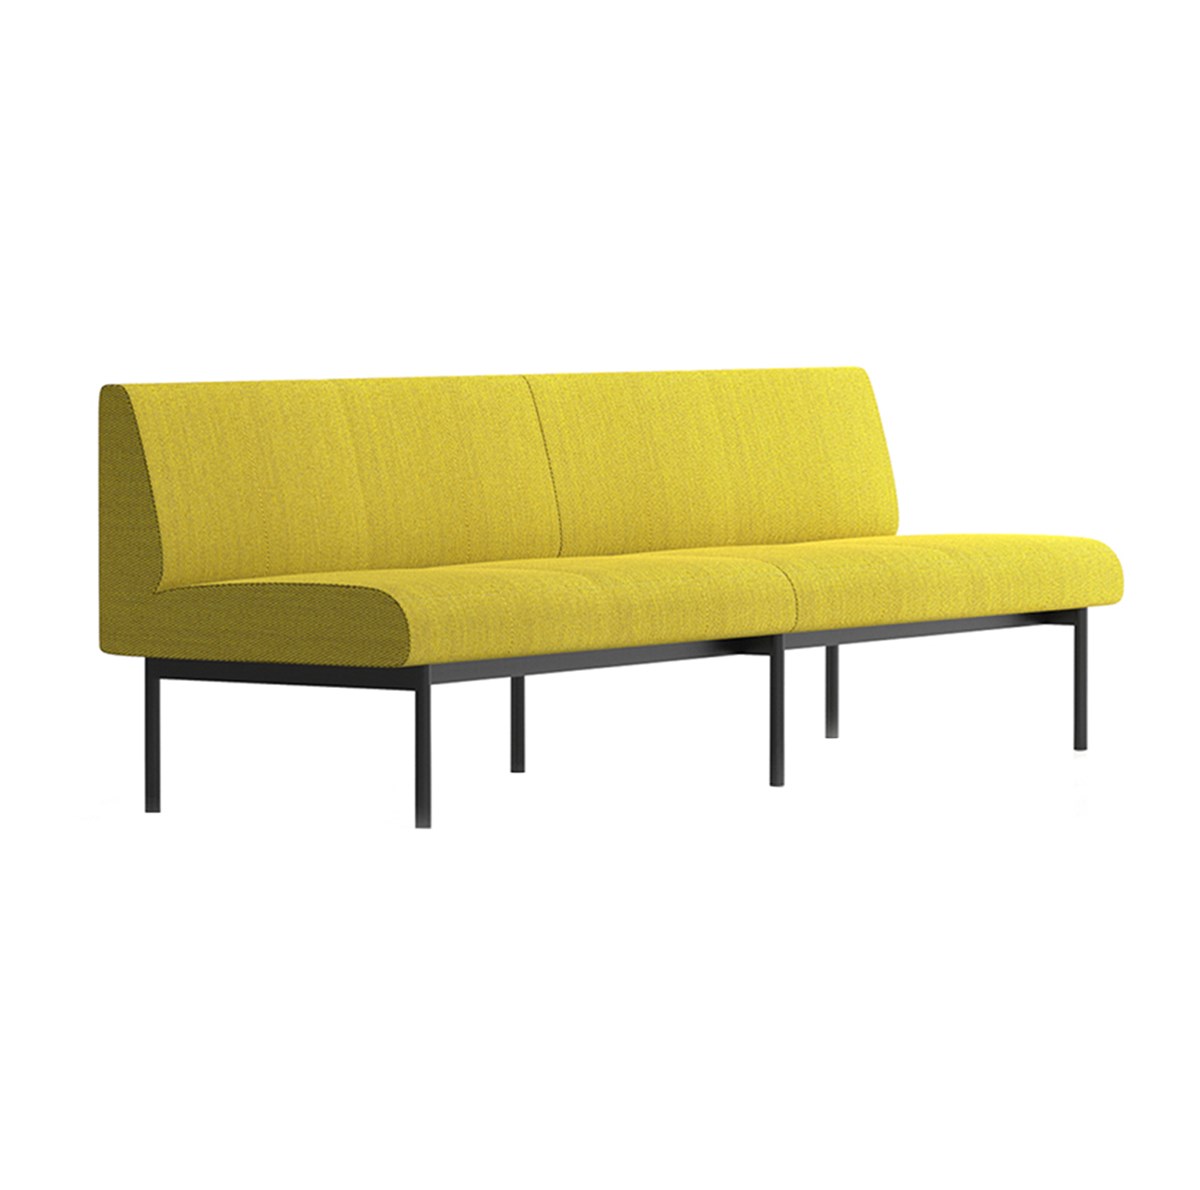 Neospace-Convey-Sofa-System-Contract-Matisse-1